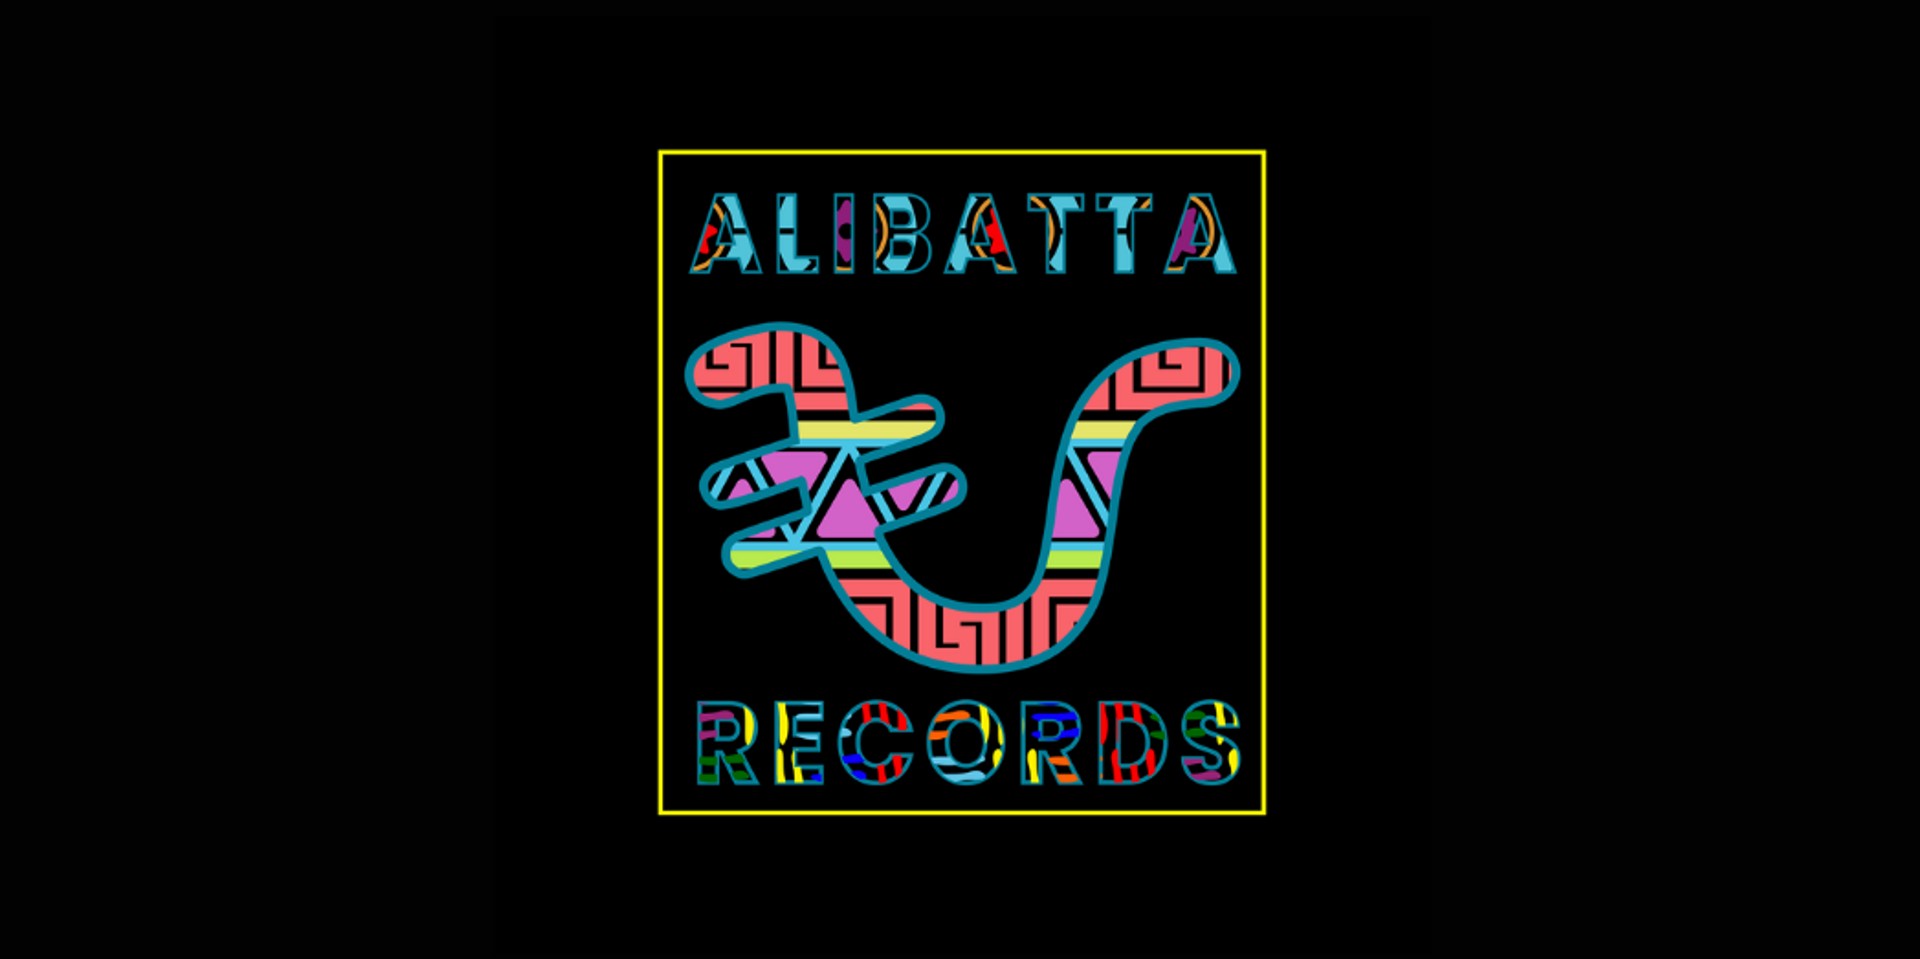 For Alibatta Records, revolutionising the music industry through NFTs and crypto is just the beginning